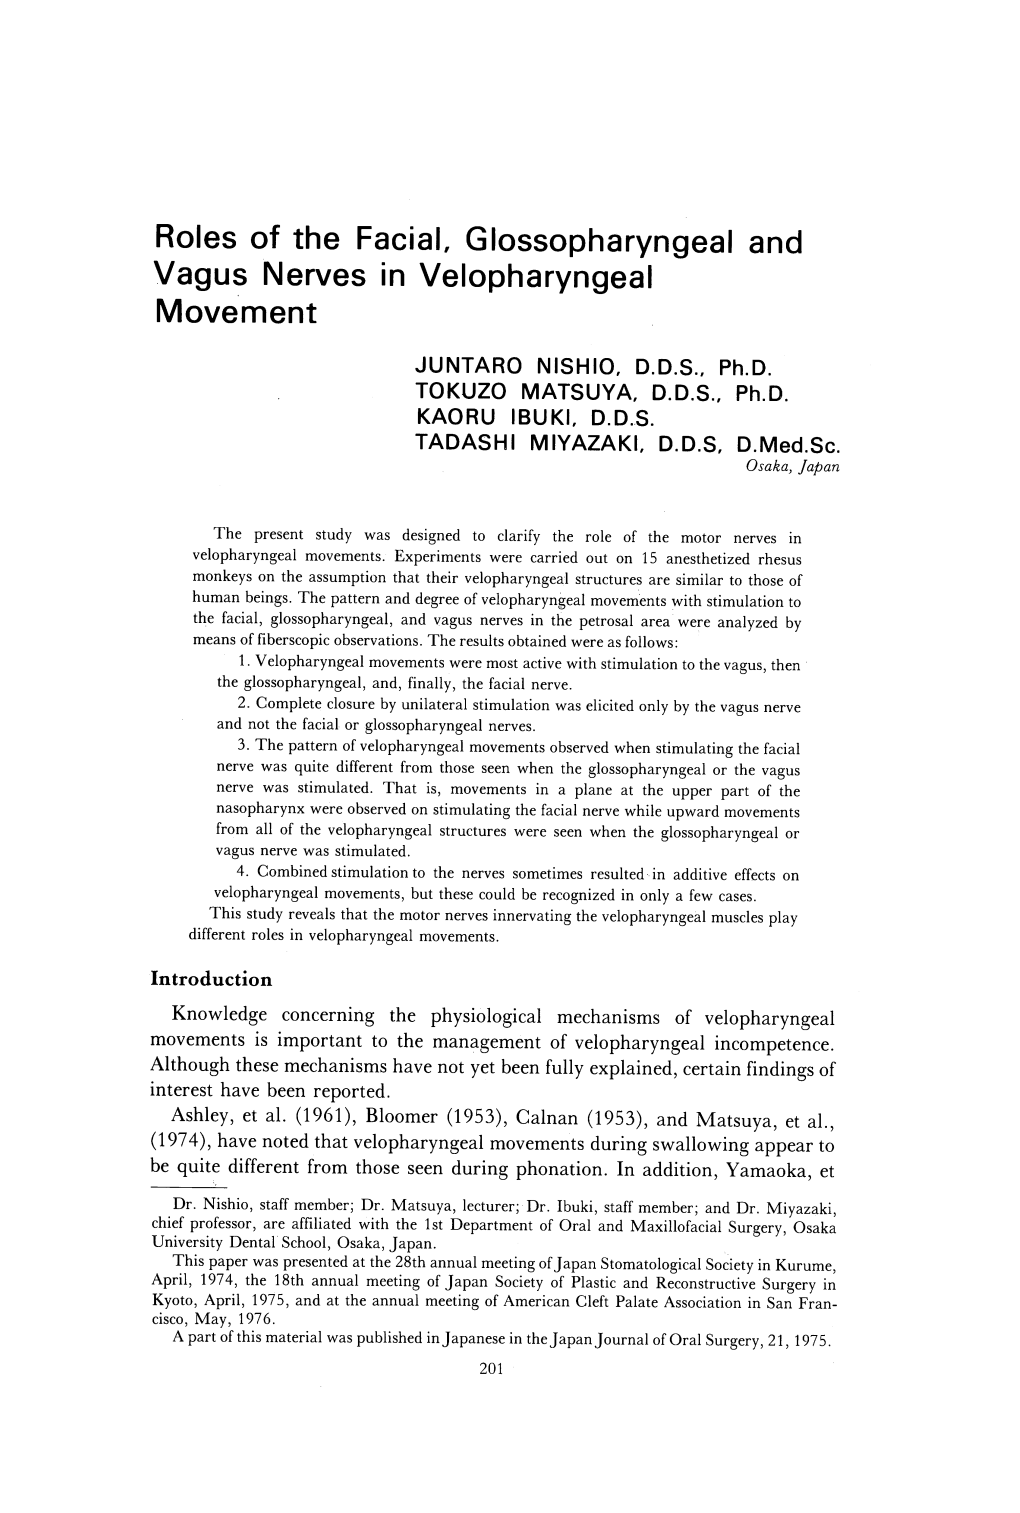 Roles of the Facial, Glossopharyngeal and Vagus Nerves in Velopharyngeal Movement JUNTARO NISHIO, D.D.S., Ph.D. TOKUZO MATSUYA